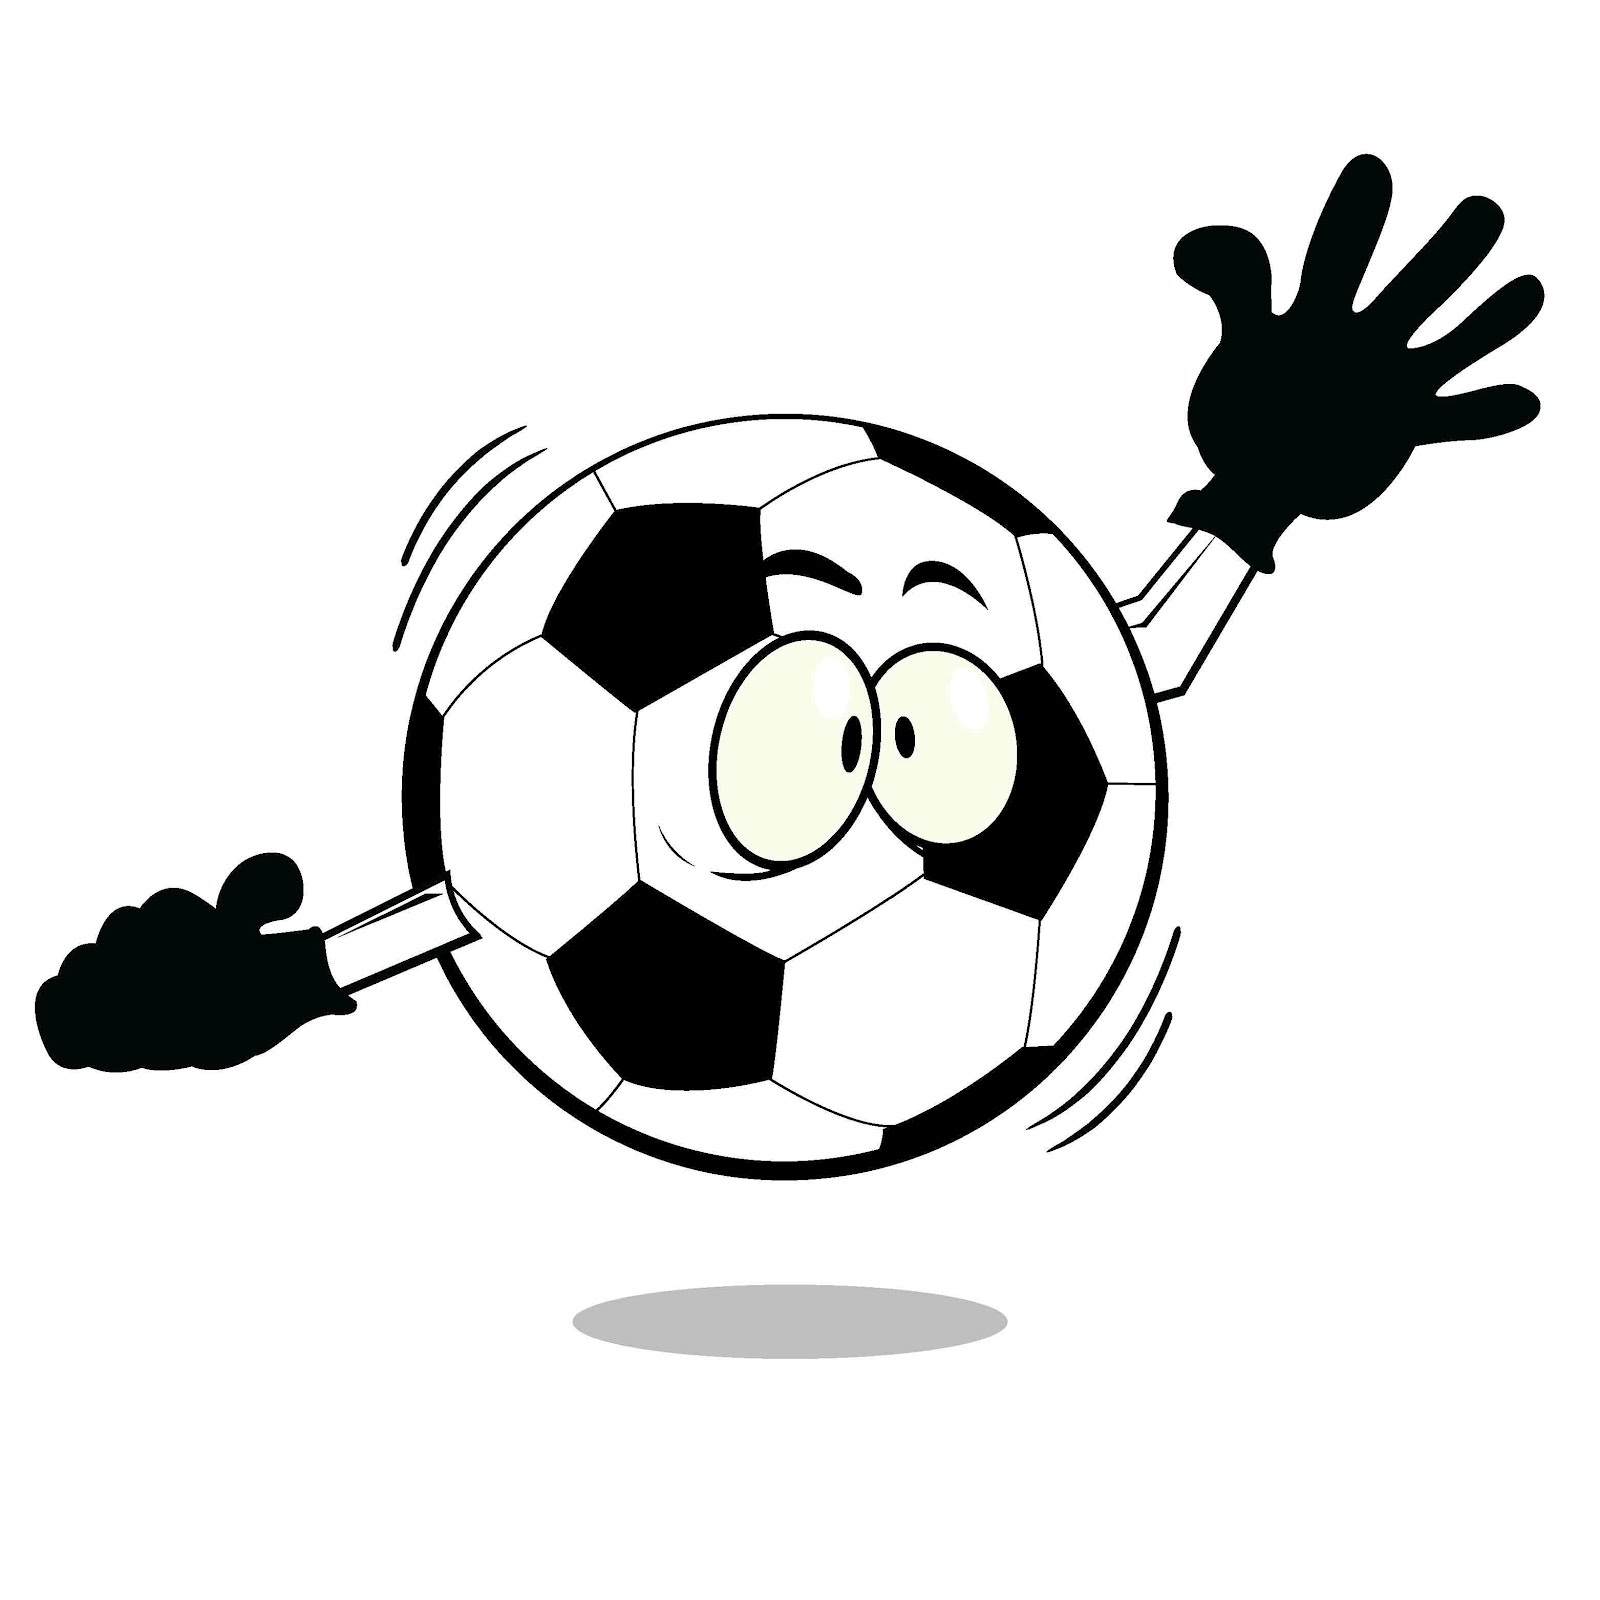 Soccer Coloring pages for Soccer Lovers